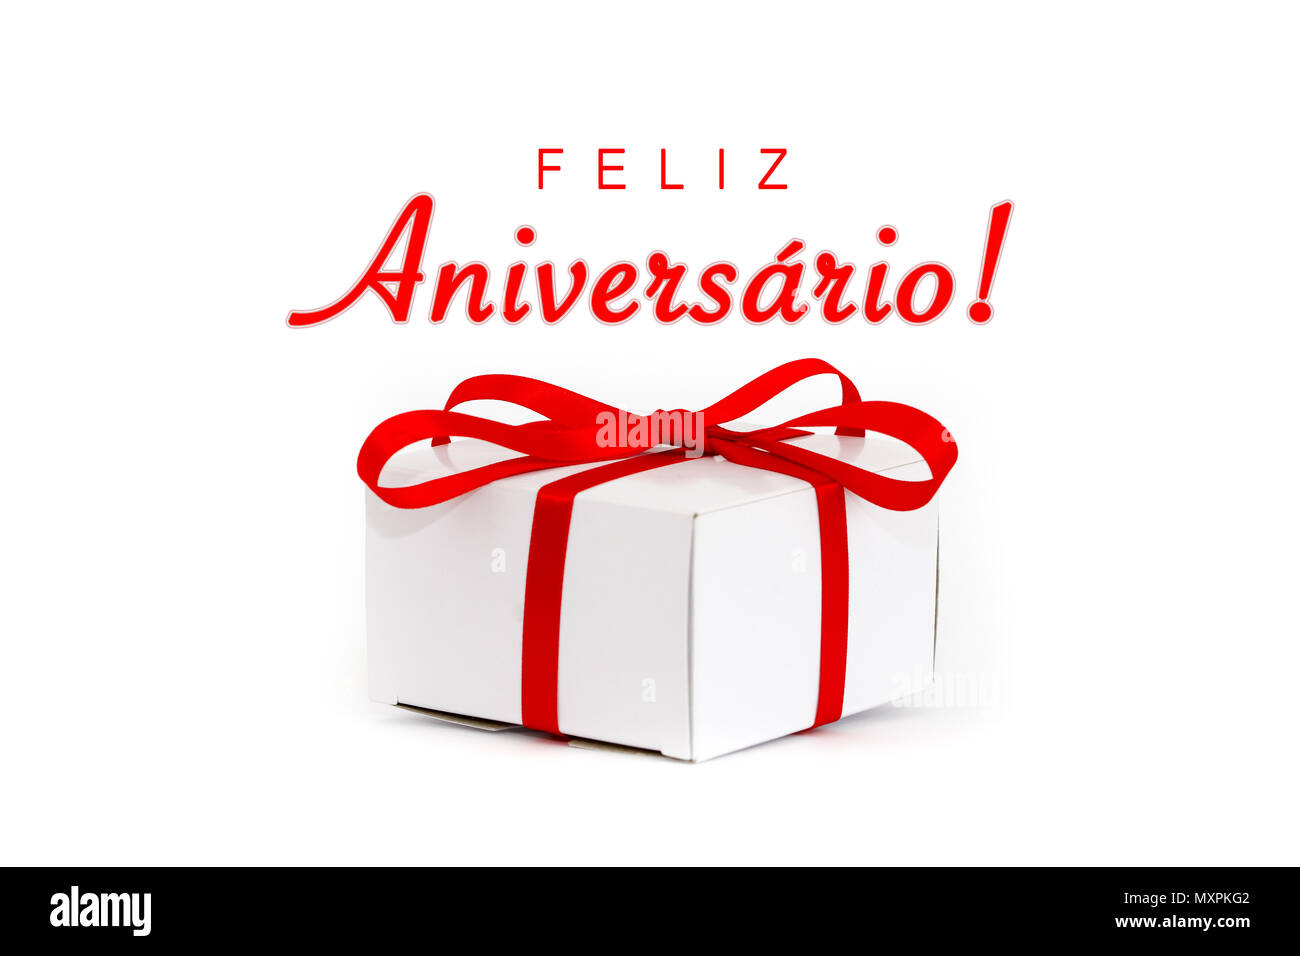 Feliz Aniversario! (in Portuguese language: Happy Birthday!) text message and white cardboard gift box with decorative red ribbon and tied bow isolate Stock Photo